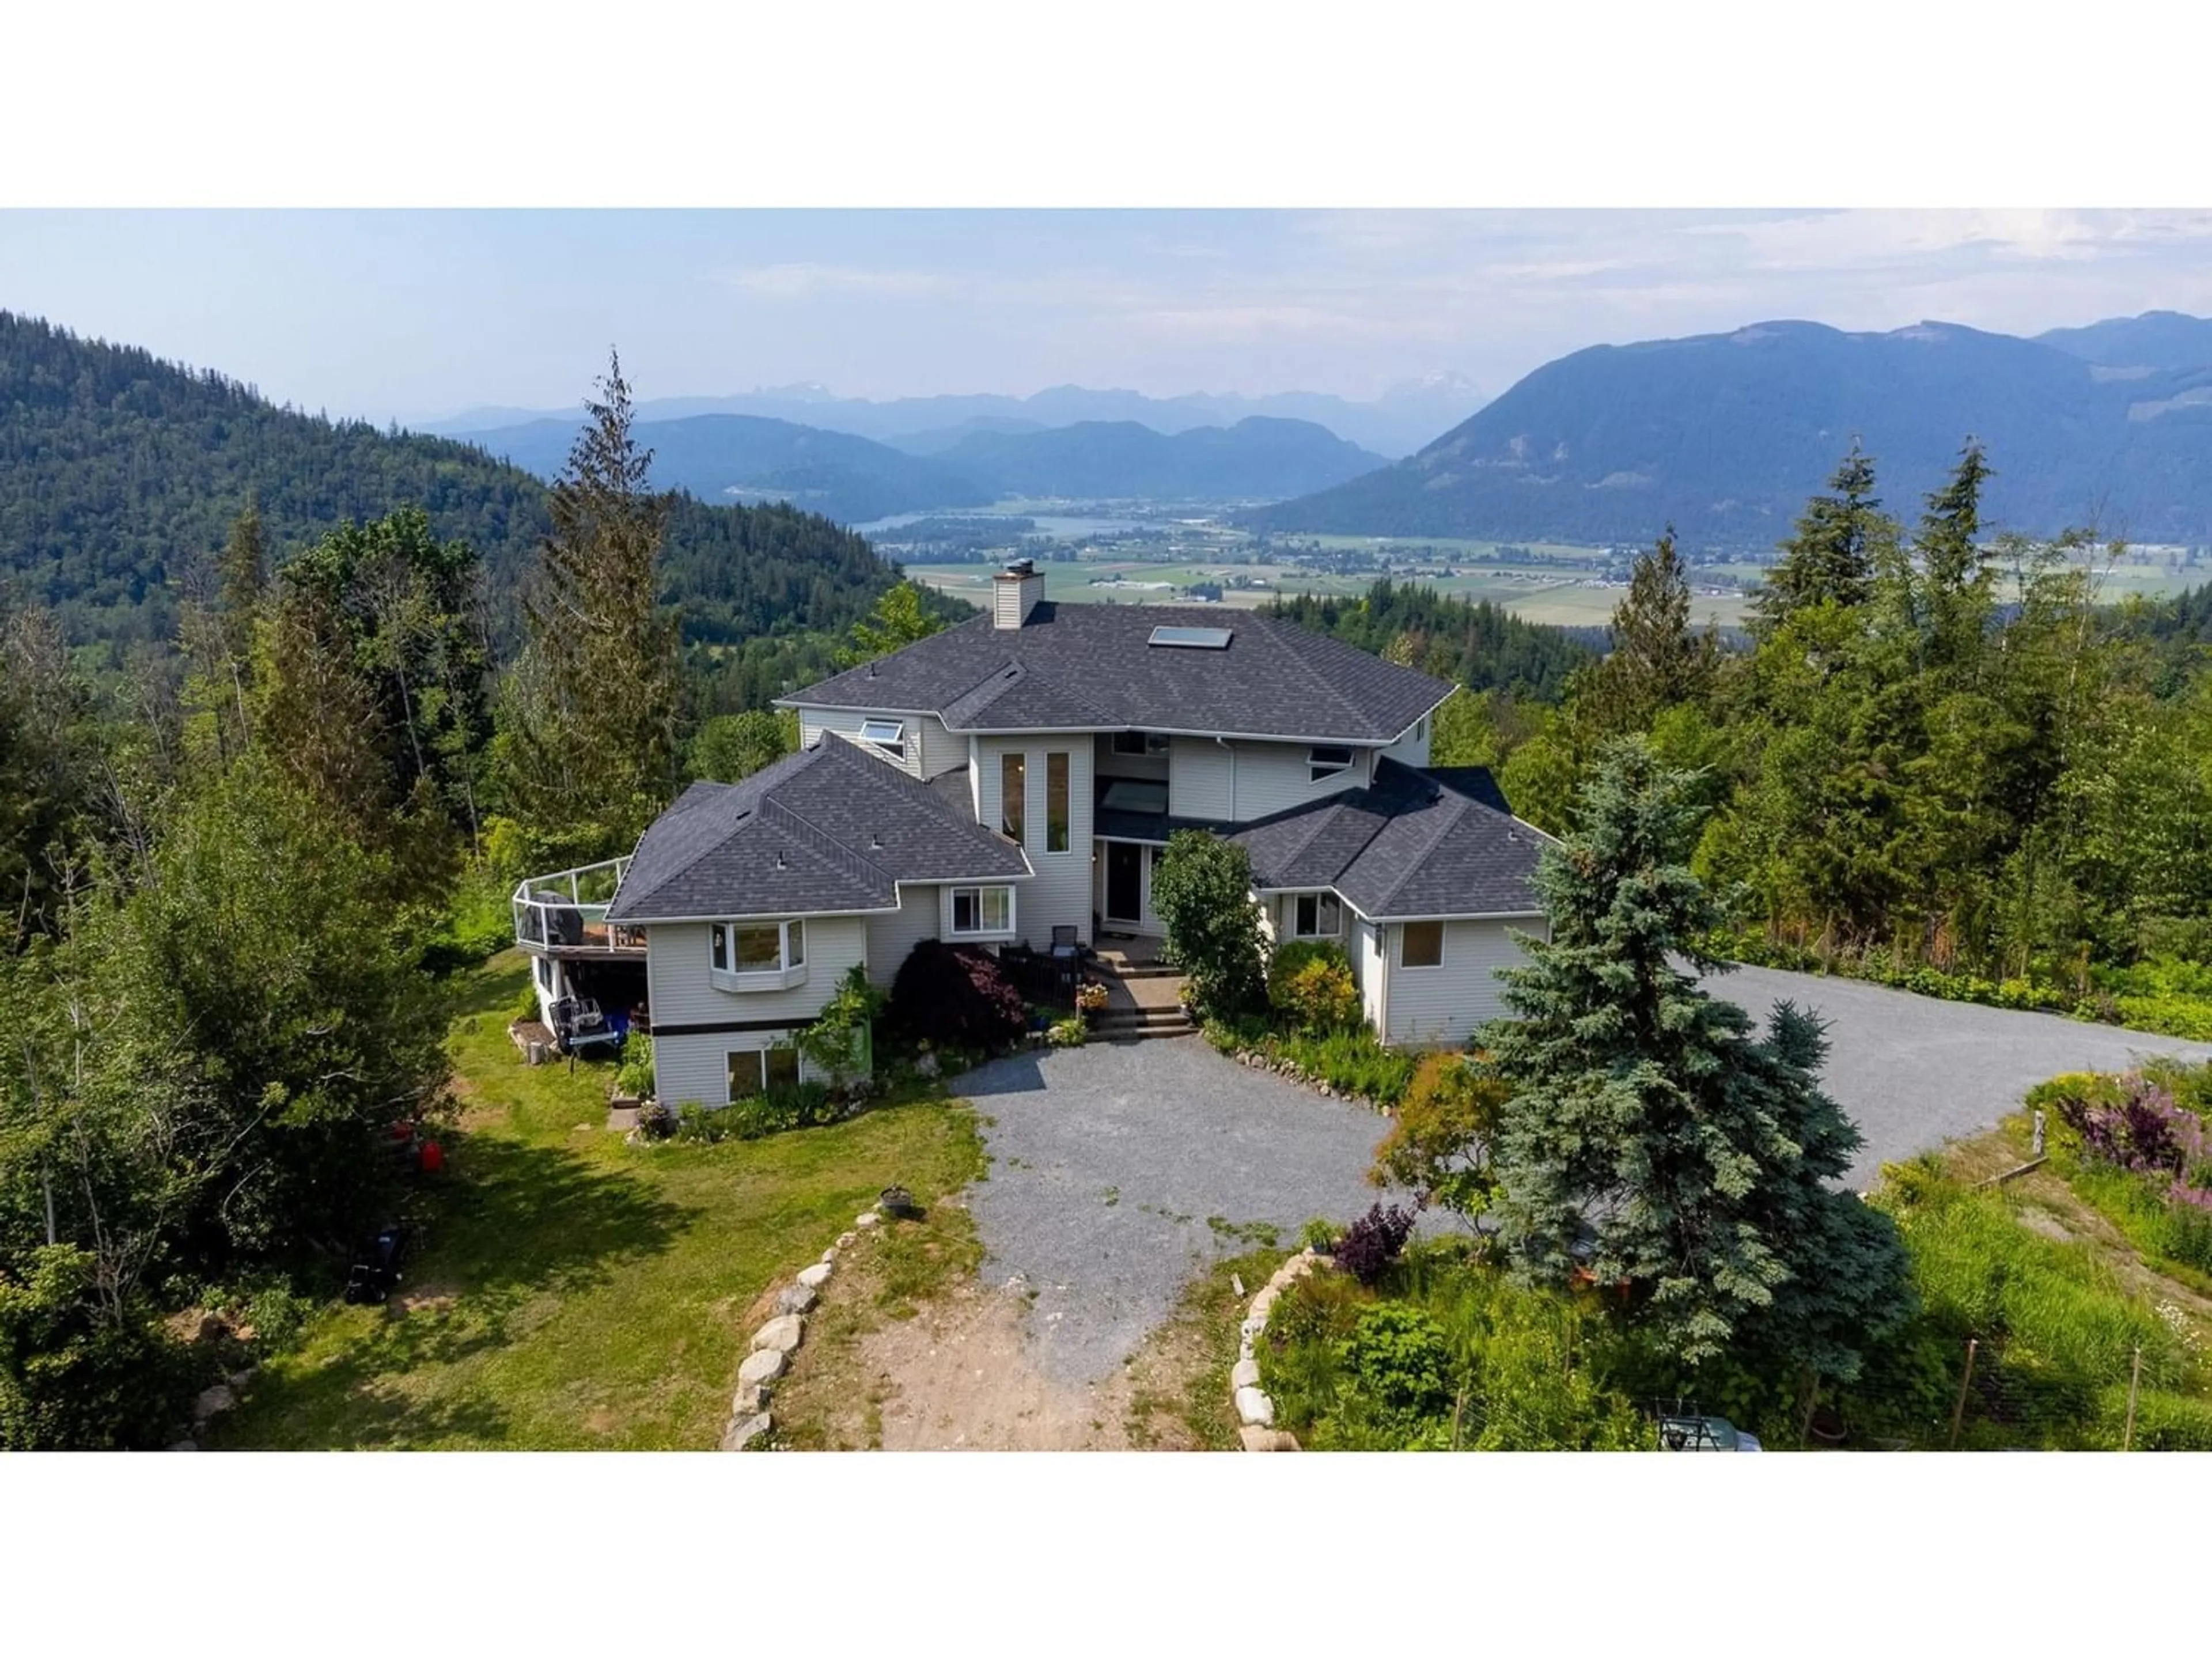 Cottage for 37777 TAGGART ROAD, Abbotsford British Columbia V3G2L2